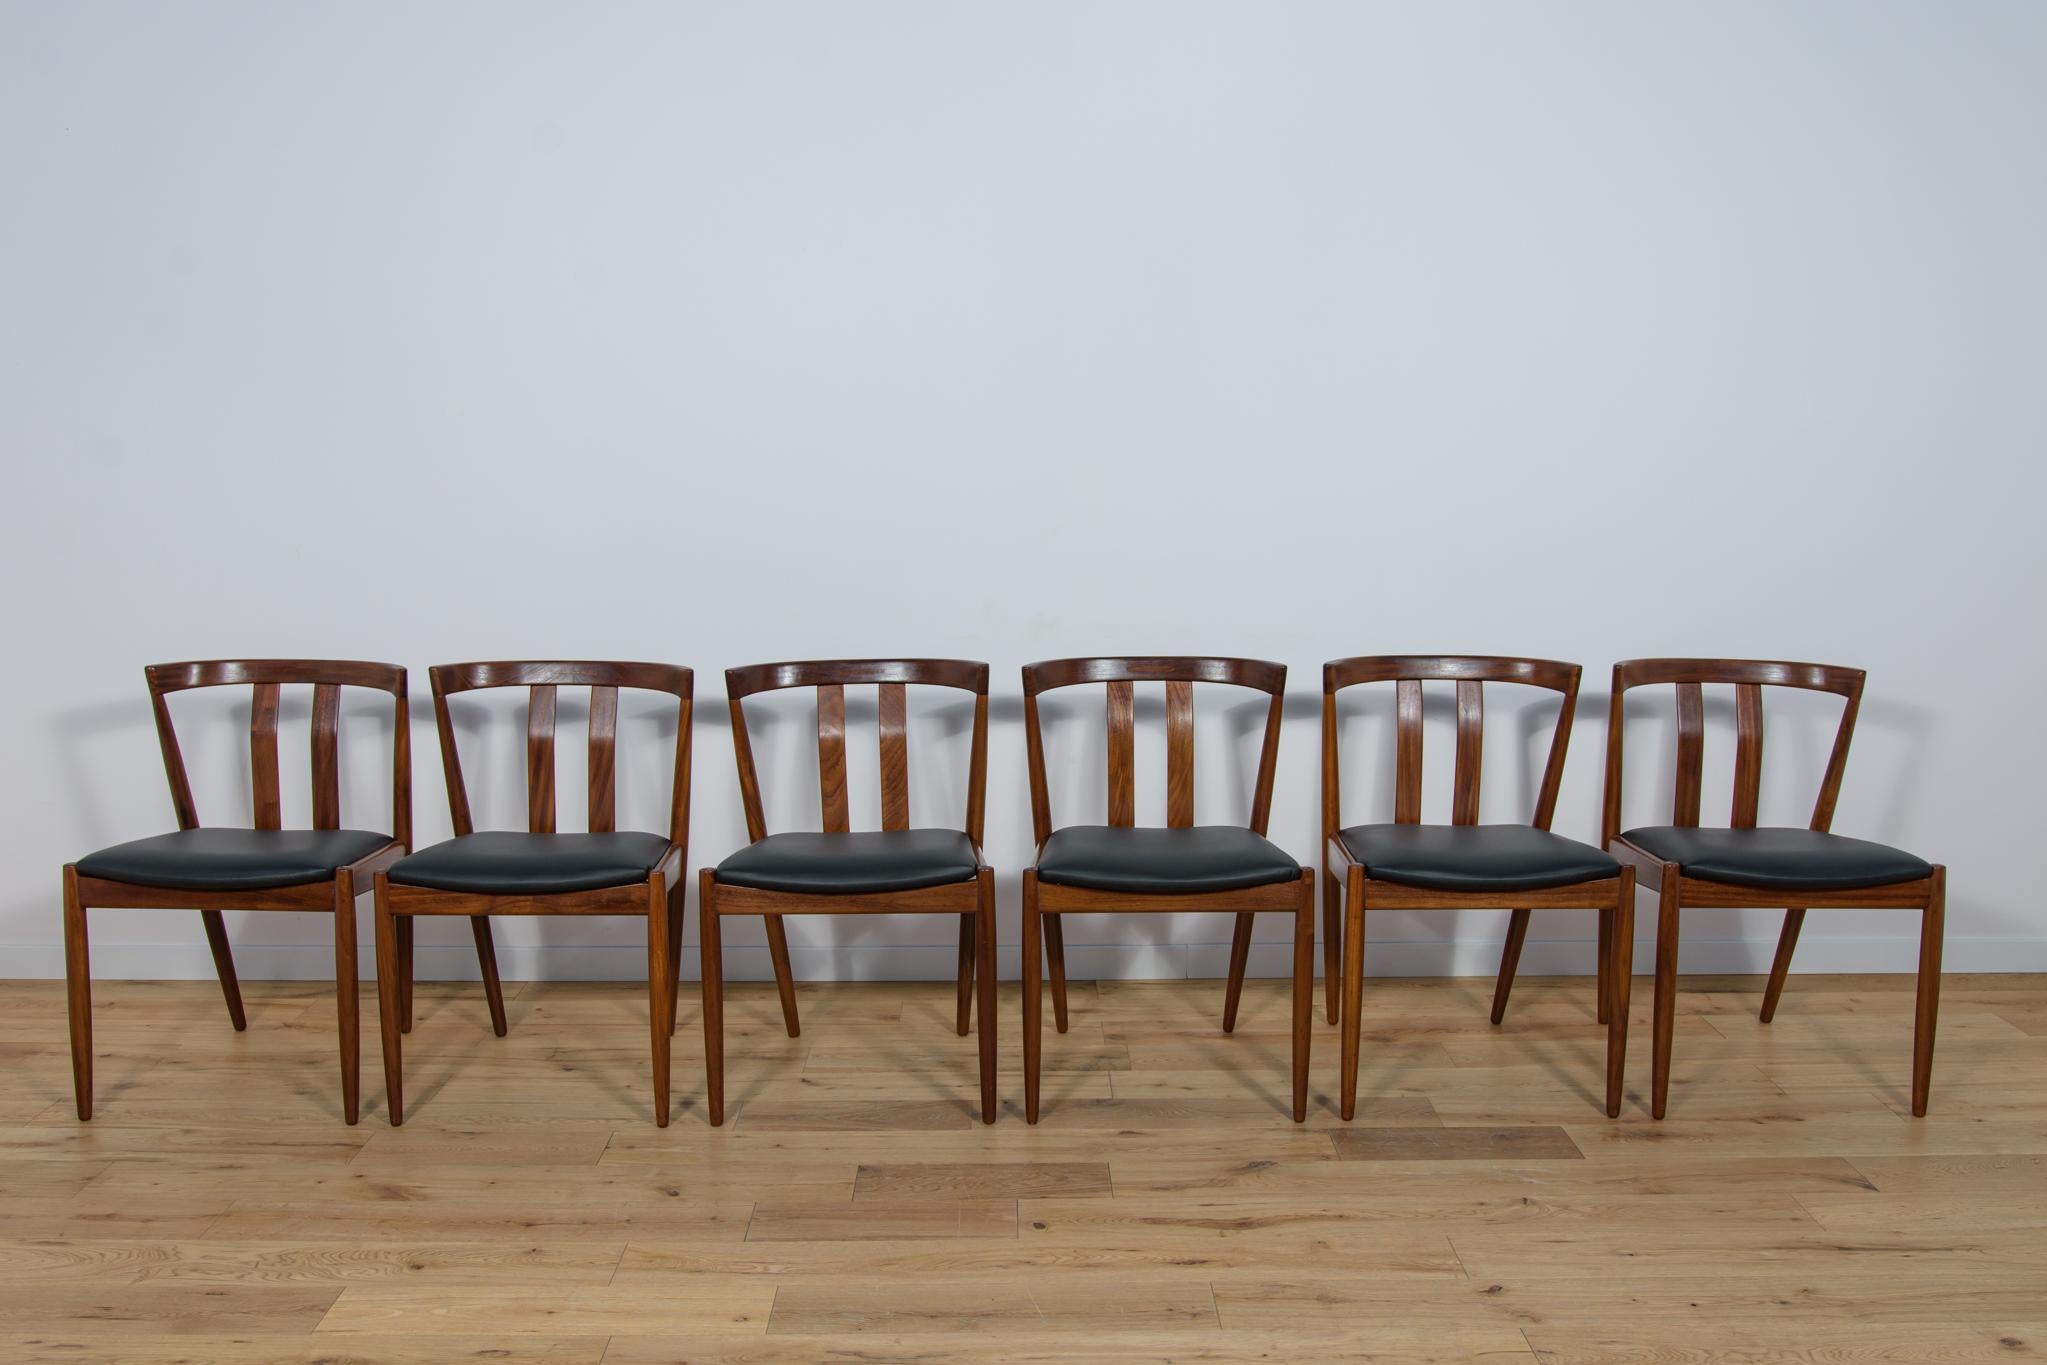 
The set of six chairs was produced in Denmark in the 1960s. The chairs were made of teak wood. A piece of furniture with a refined design combined with high craftsmanship of carpentry elements. This is evidenced by the design of the backrest and